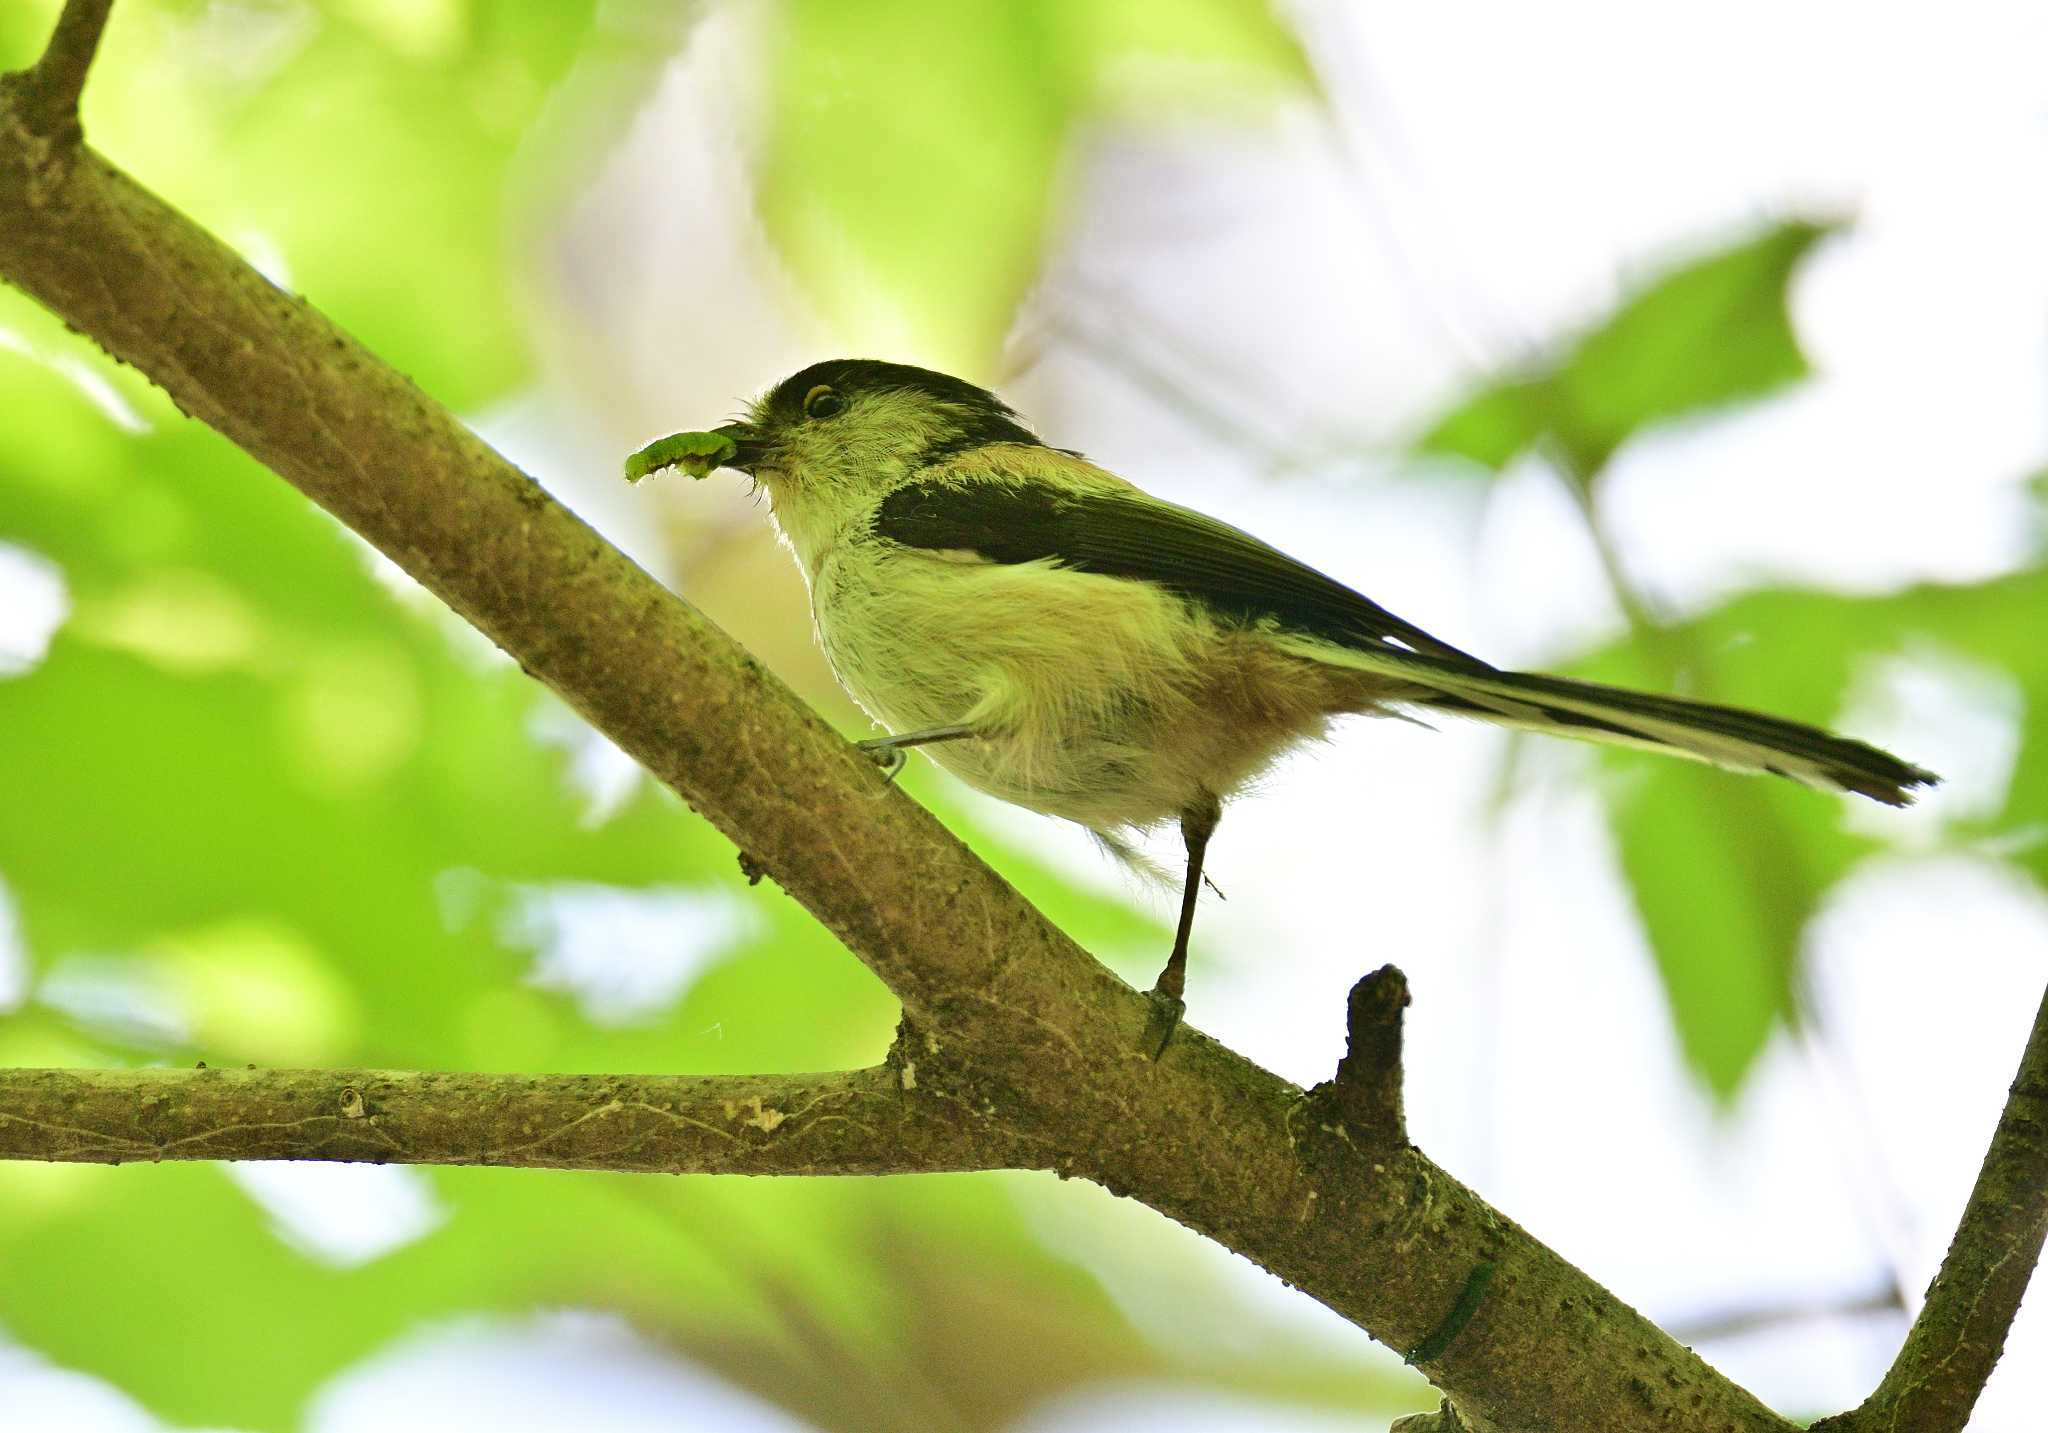 Photo of Long-tailed Tit at 南アルプス邑野鳥公園 by 塩コンブ